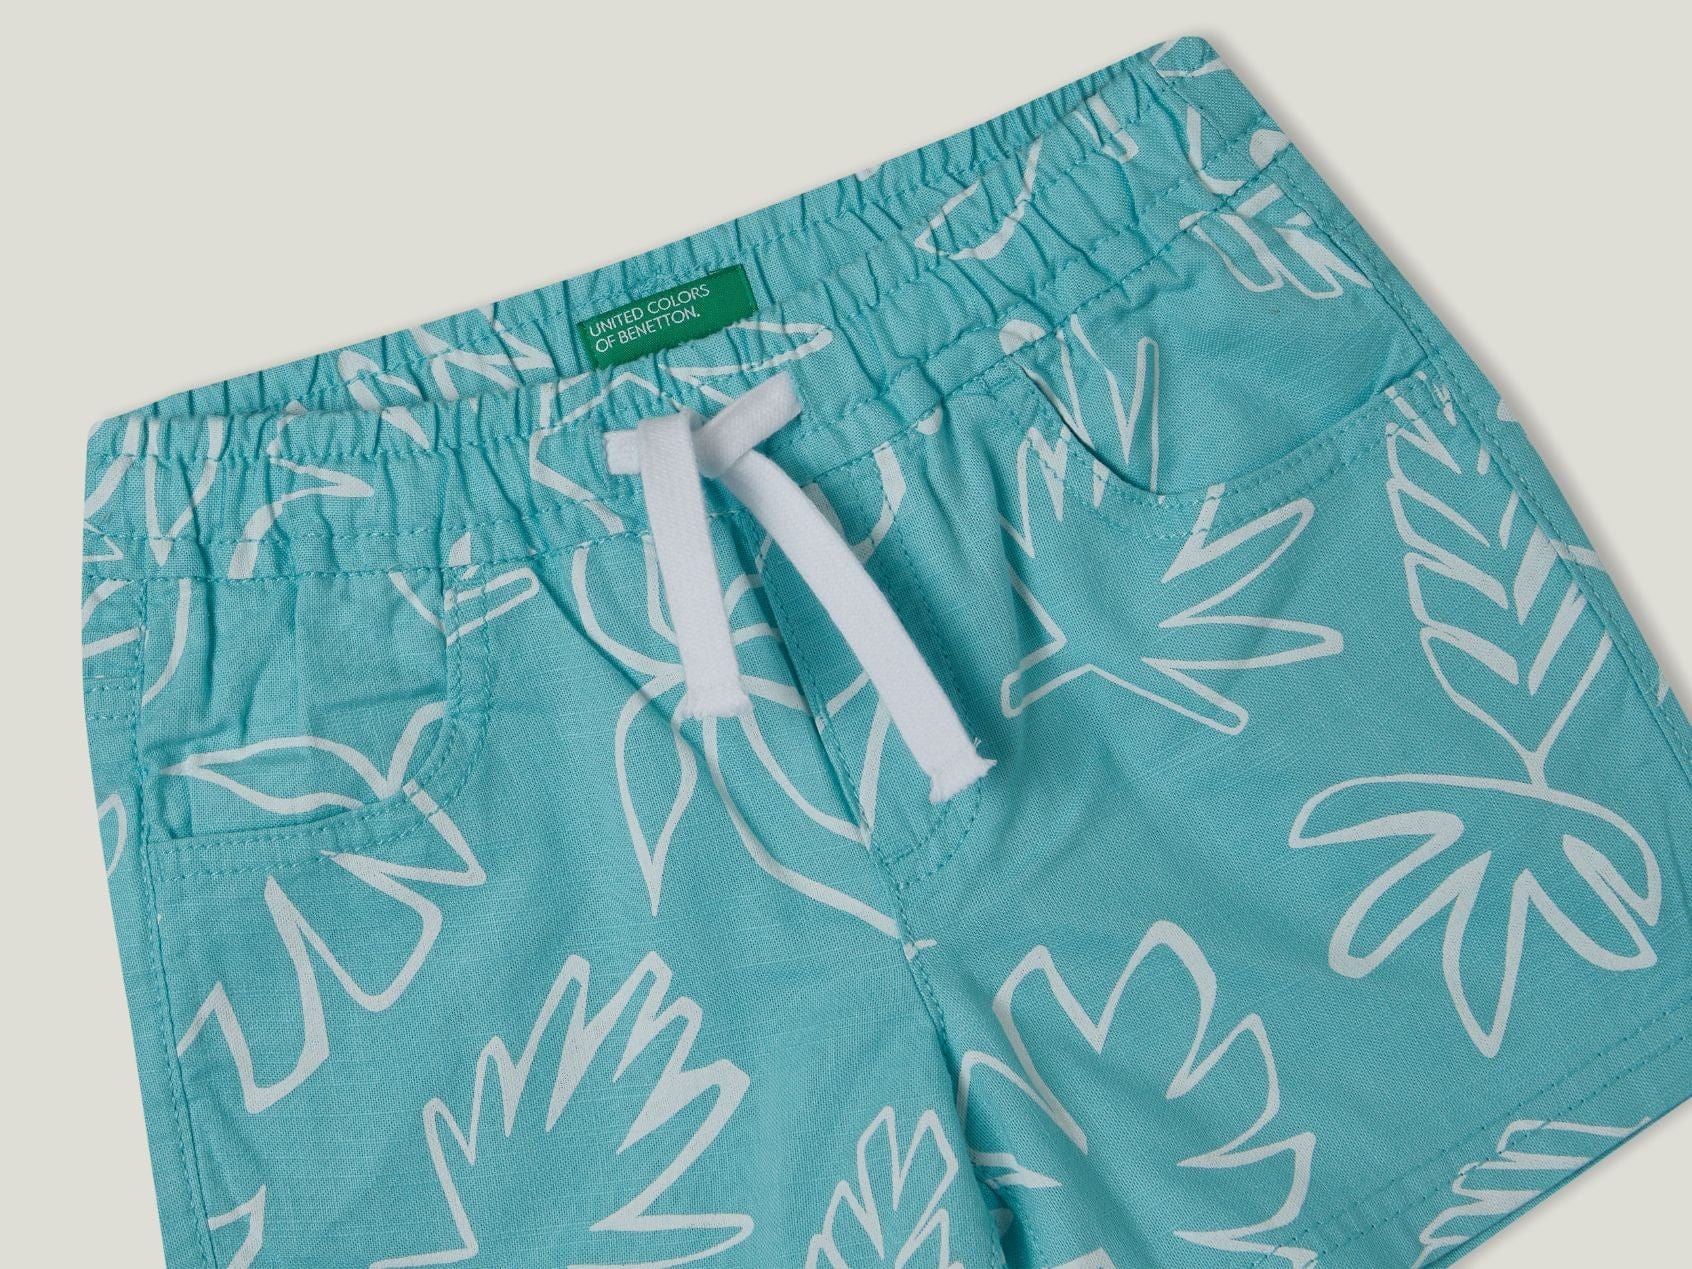 Shorts with patterned print